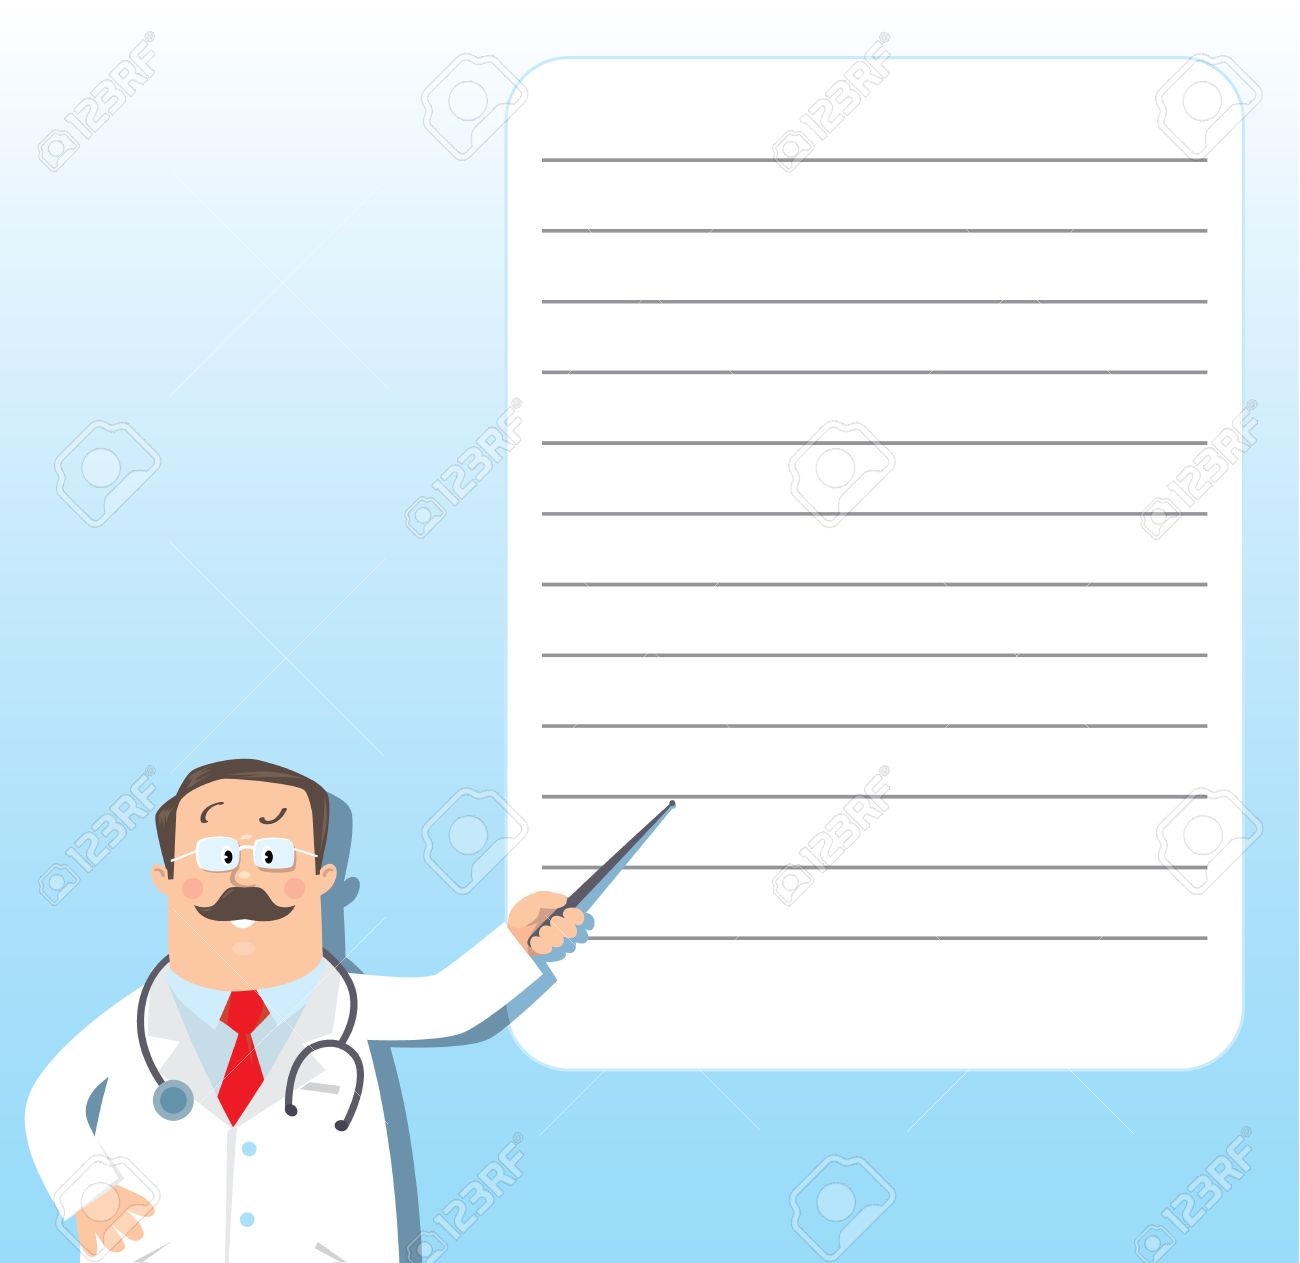 Design Template Background For Prescription Or Memory Stick With